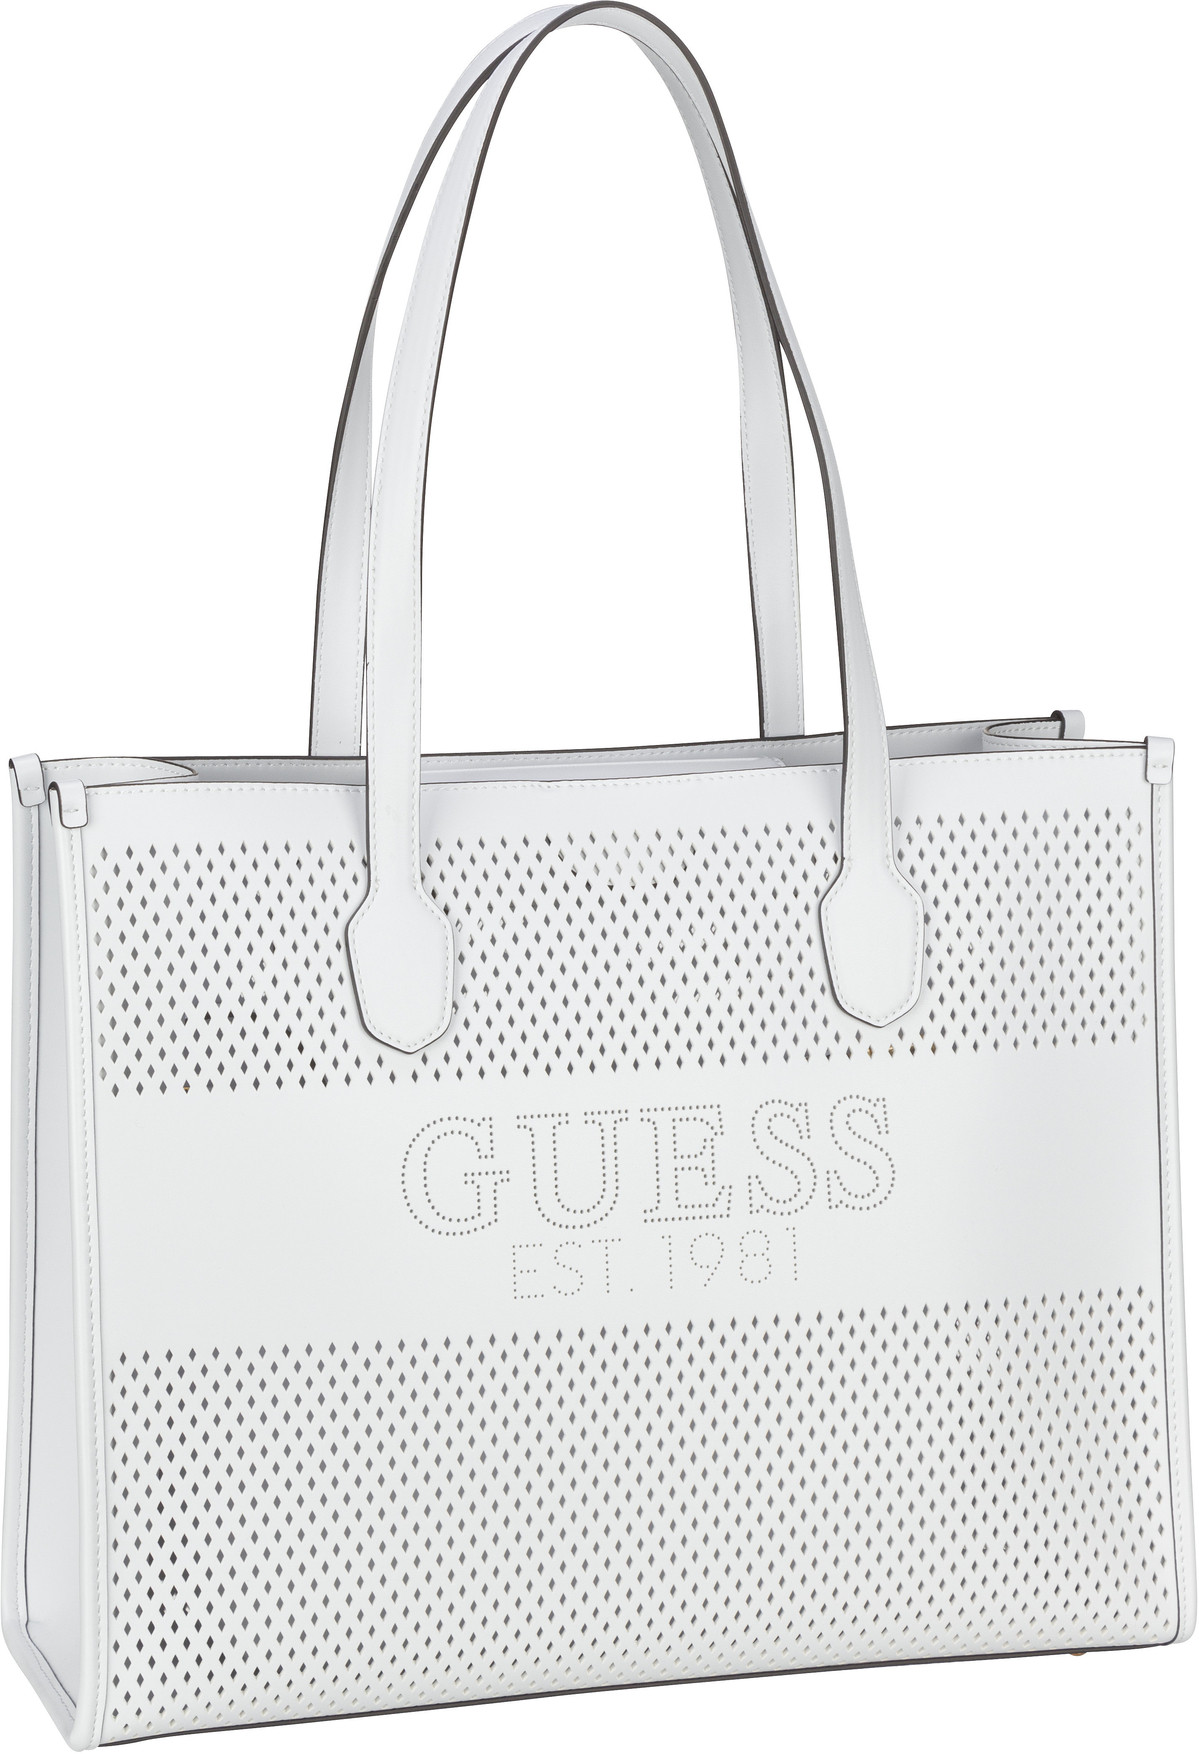 Guess Katey Tote WH  in Weiß (19.8 Liter), Shopper